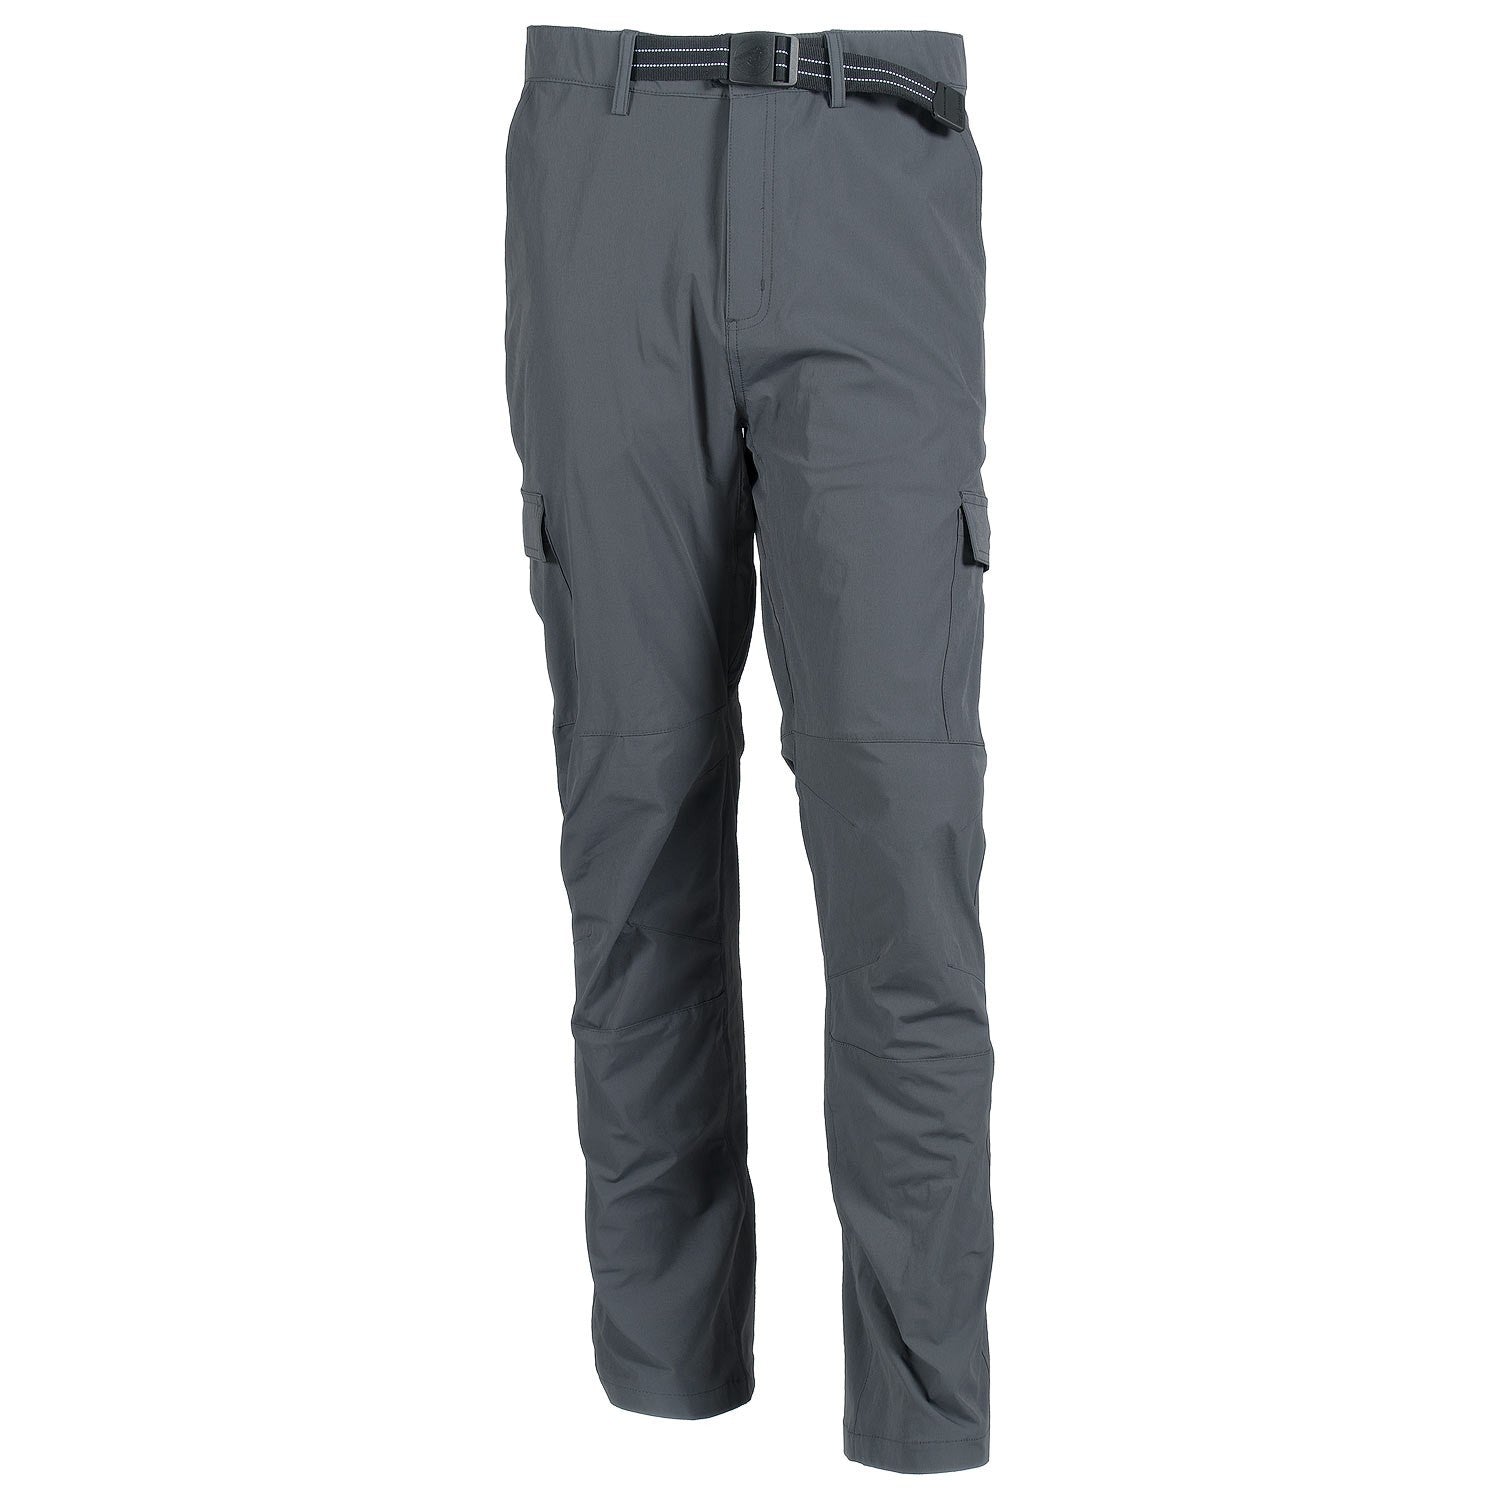 First Ascent Men's Stretch Fit Hiking Pants